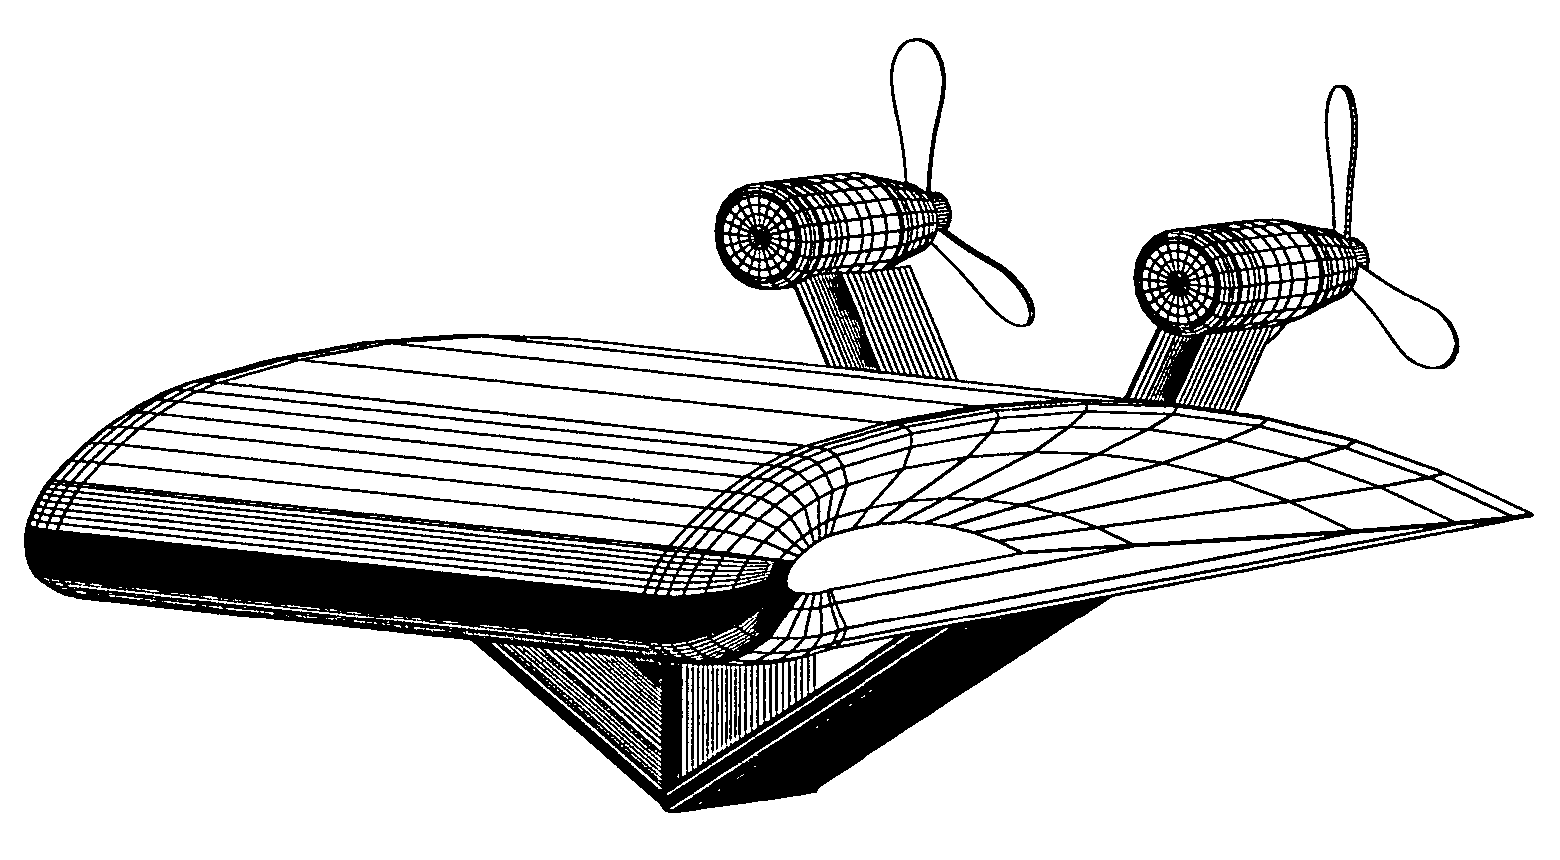 Passenger watercraft using three methods of lift; displacement, hydrofoil, and ground-effect (wing-in-ground) operating over water